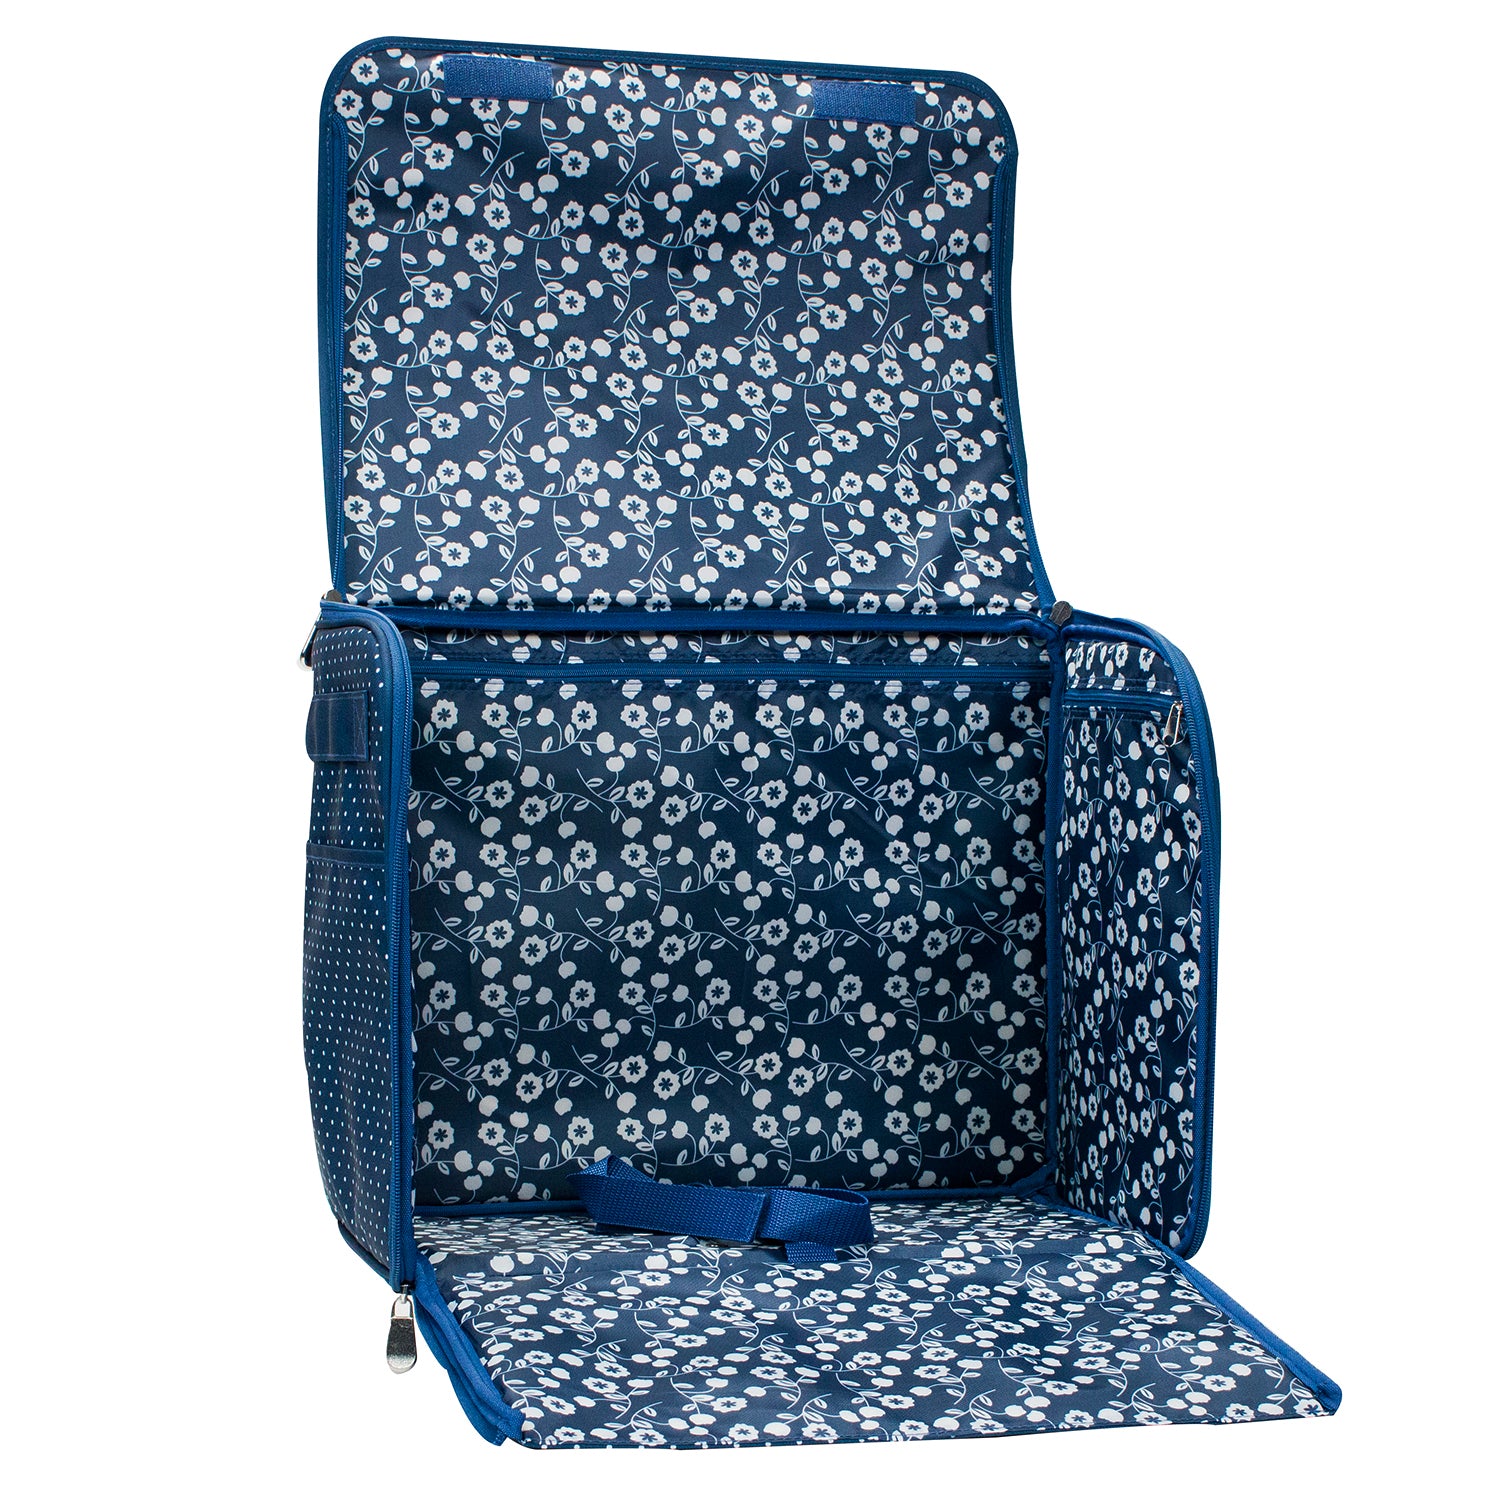 Everything Mary Collapsible Cheetah Print Rolling Sewing Machine Tote, 16.9 x 6.1 x 16.43